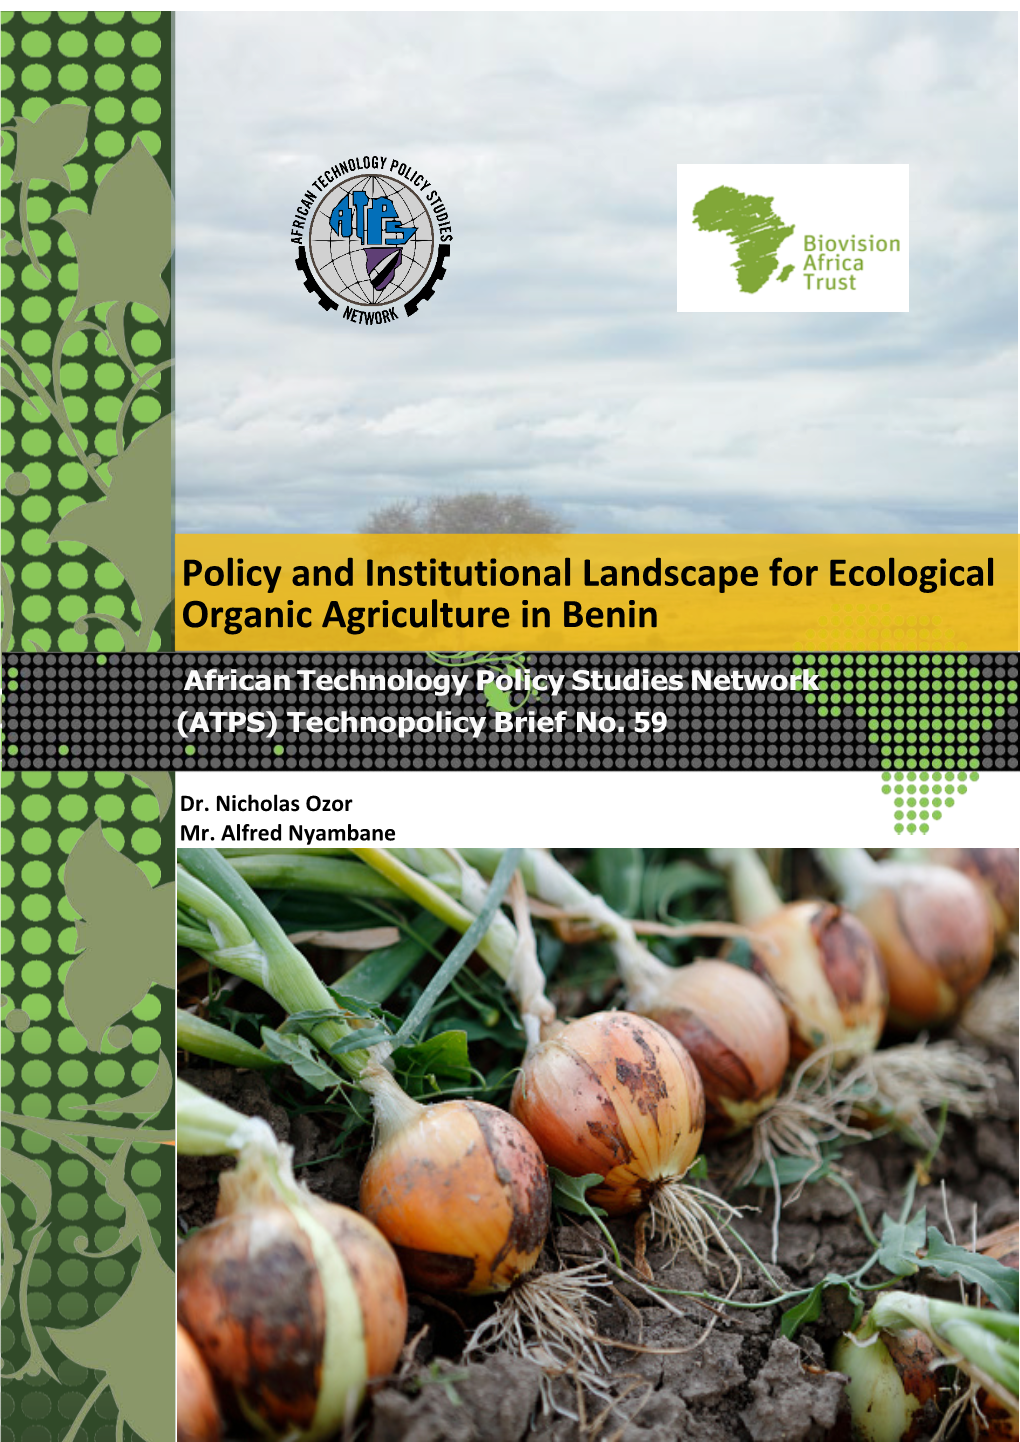 Policy and Institutional Landscape for Ecological Organic Agriculture in Benin